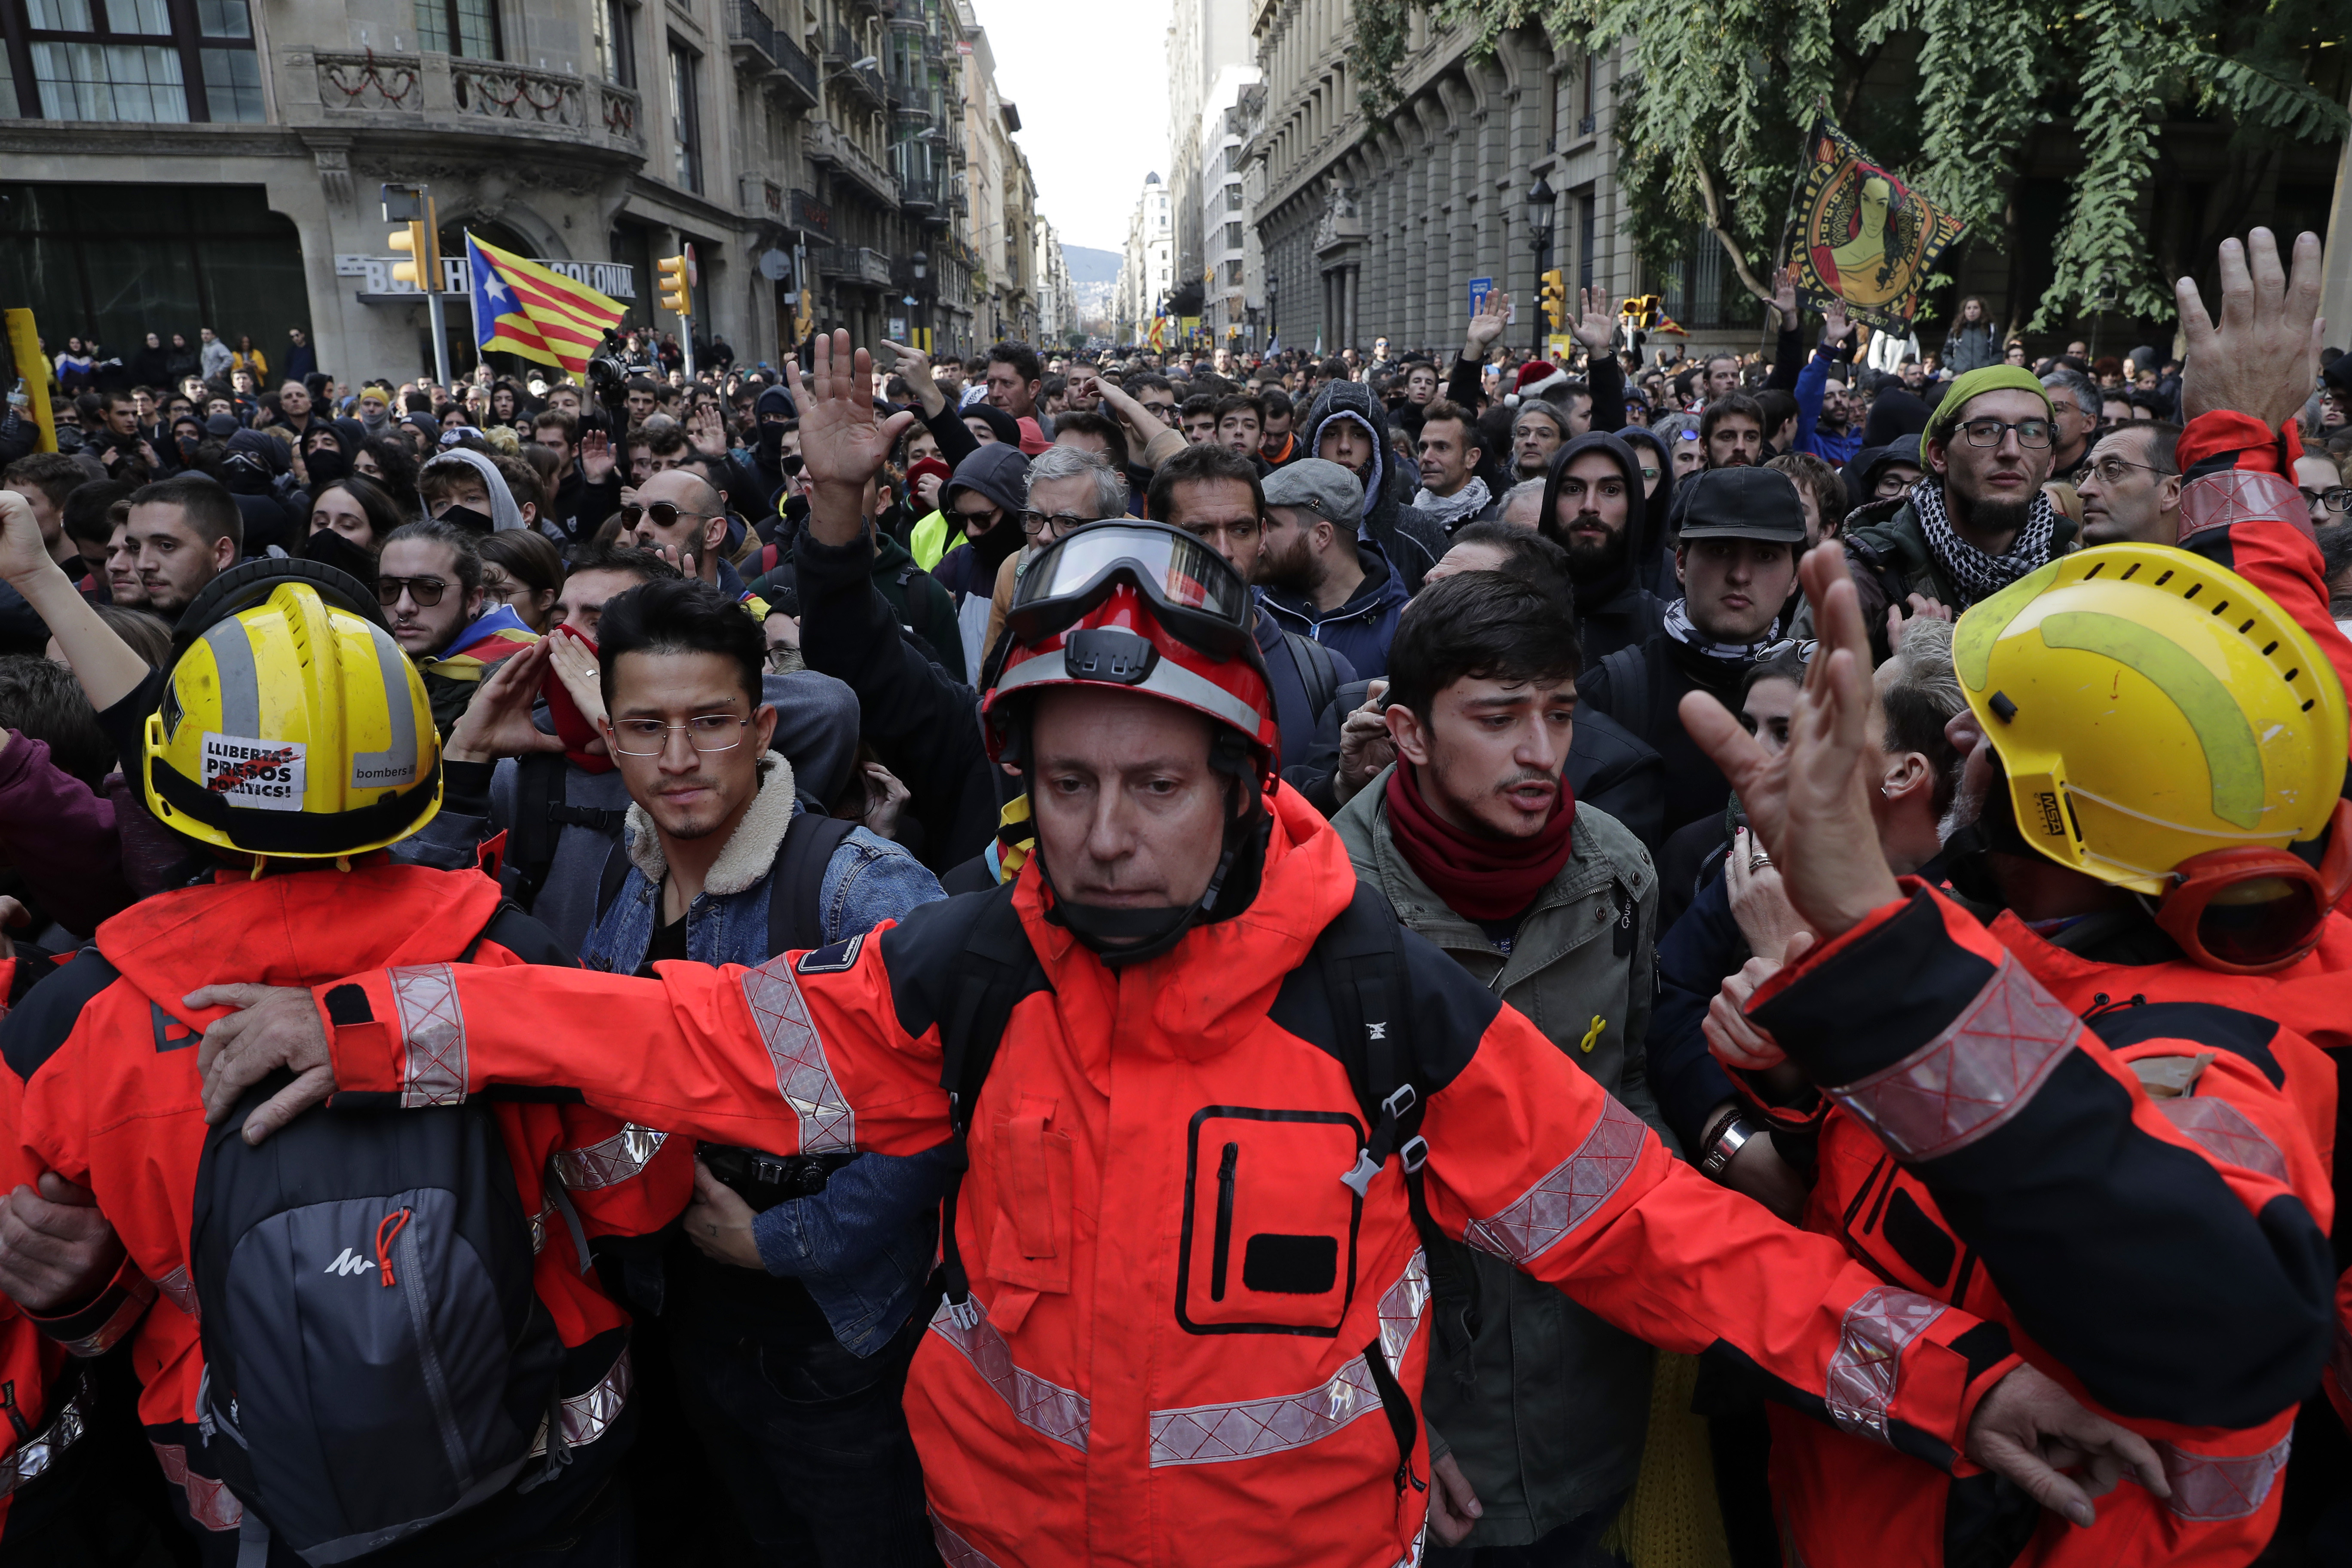 Firefighters help to control the demonstrators during a protest against Spain's cabinet holding a meeting in Barcelona Spain, Friday Dec. 21, 2018. Scuffles broke out between protesters trying to reach the venue of the cabinet meeting and police trying to stop them on Friday in central Barcelona after pro-independence organizations called for peaceful demonstrations against the meeting across the city. (AP Photo/Manu Fernandez)